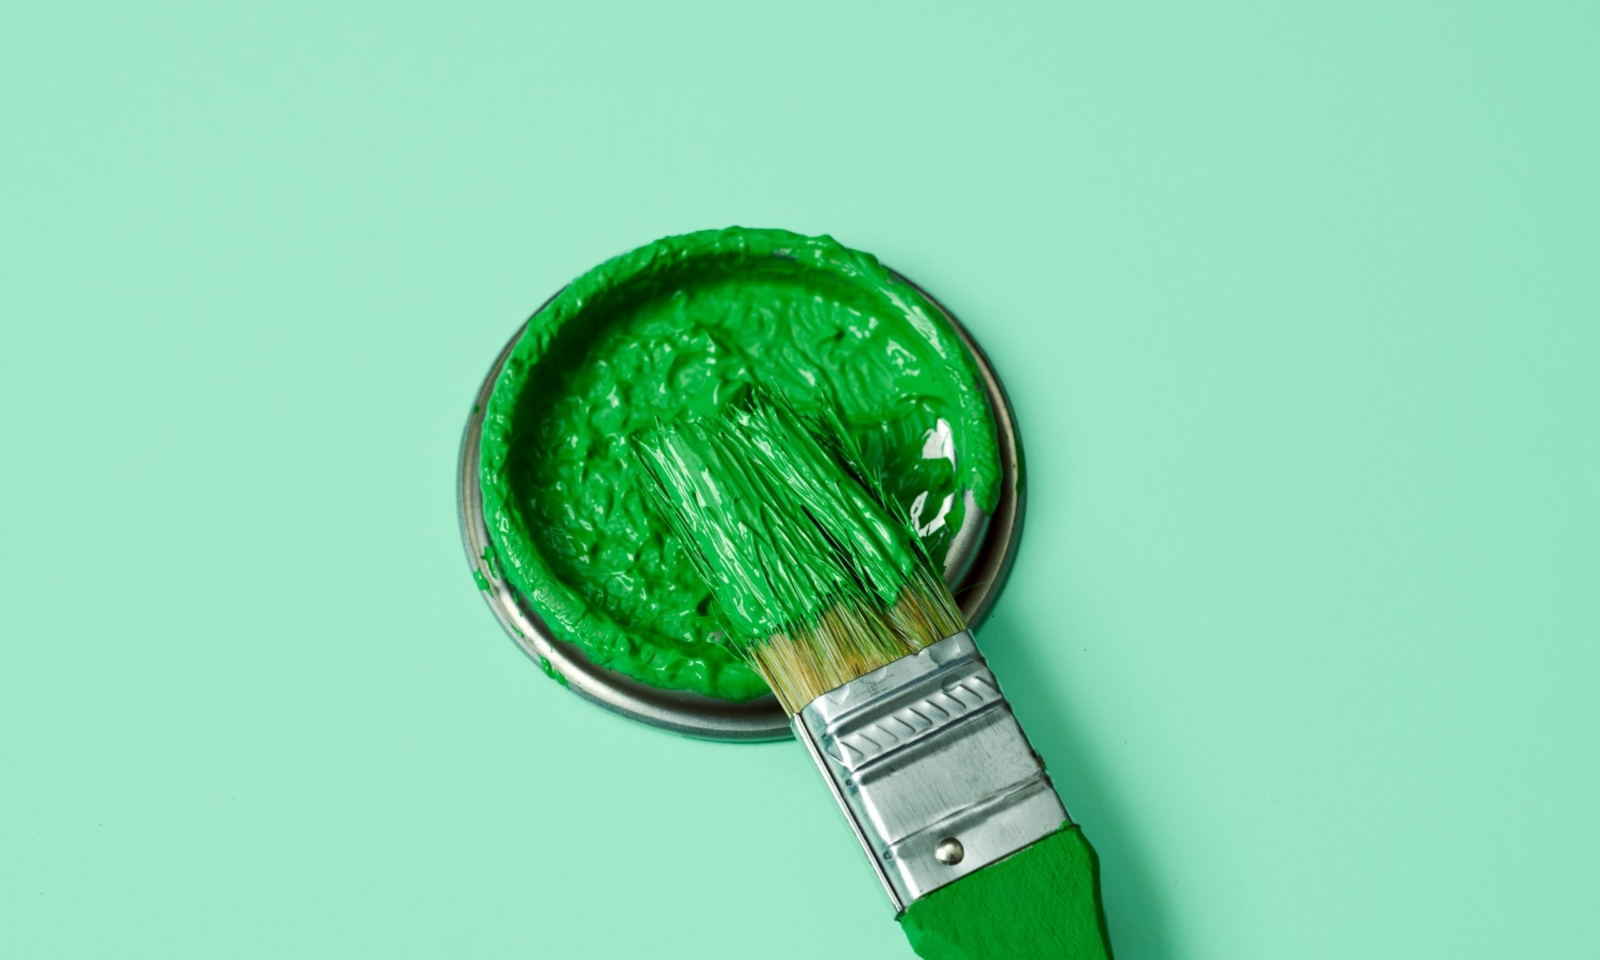 How to avoid greenwashing in your marketing efforts